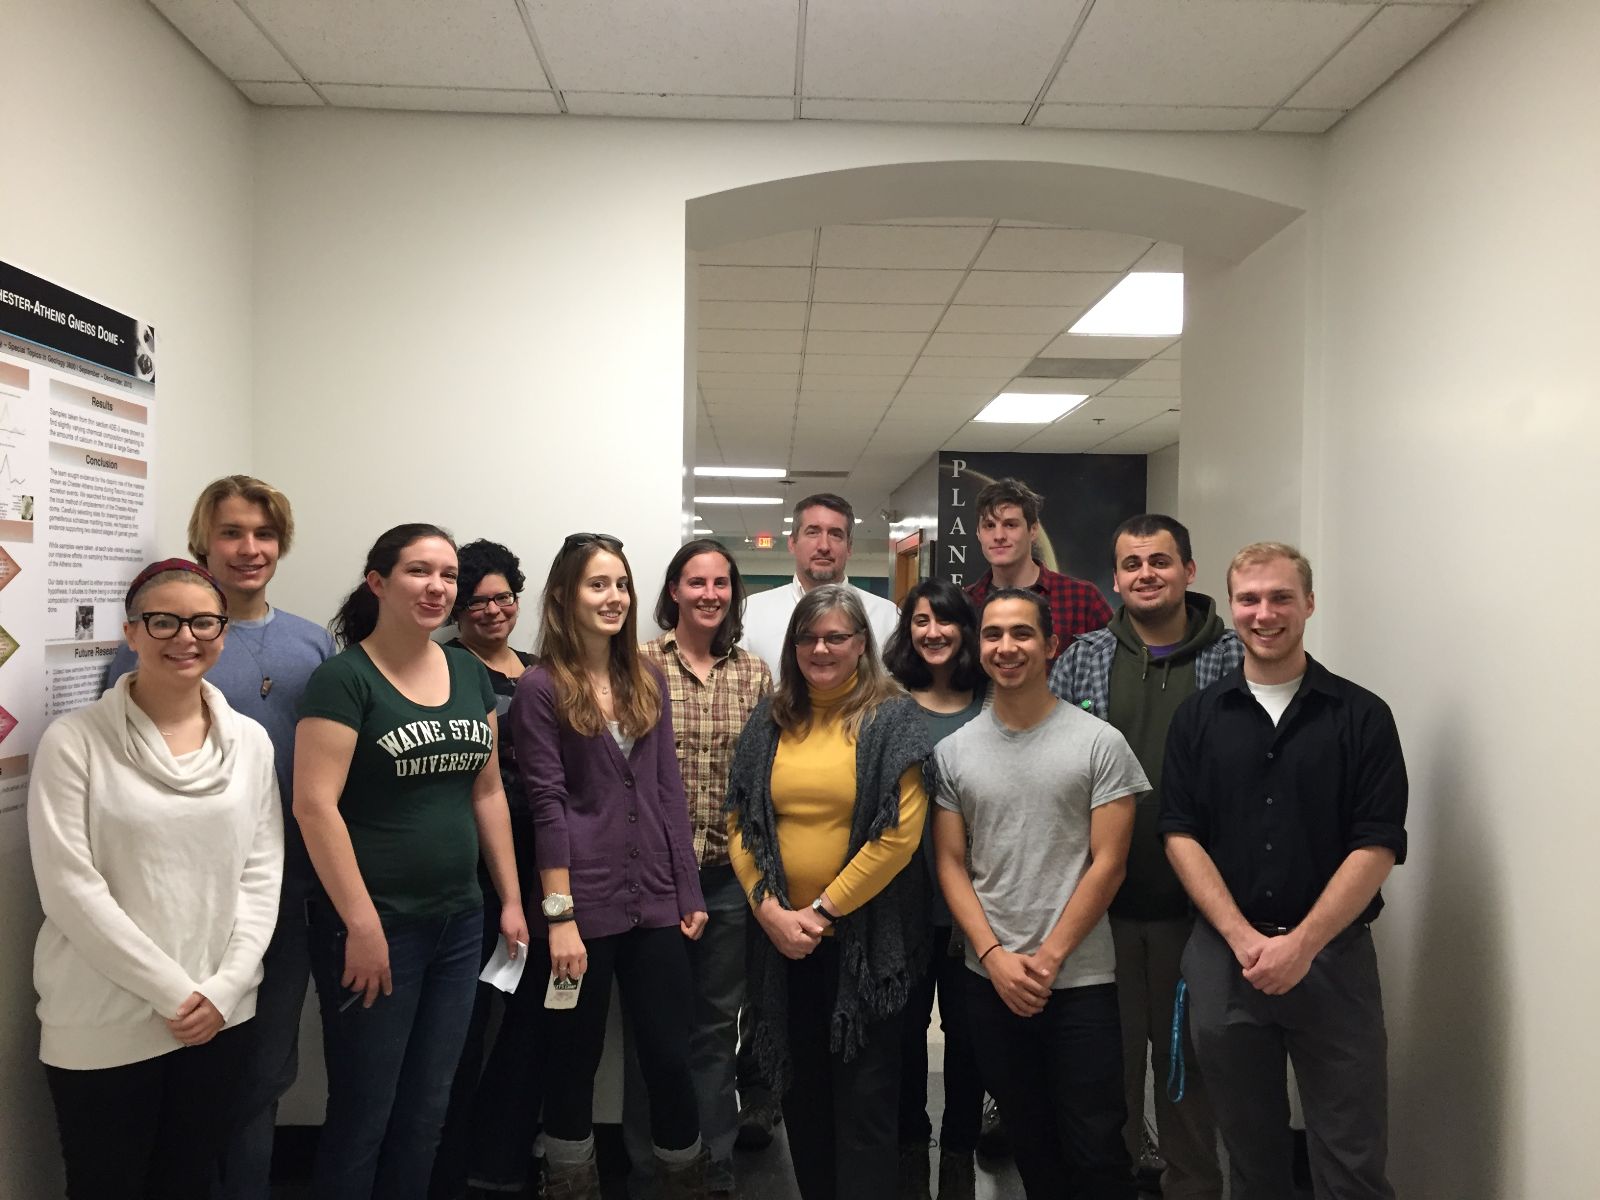 Finally, students from the inaugural GEL 3600 (Team Research) course can smile and enjoy the end of the semester